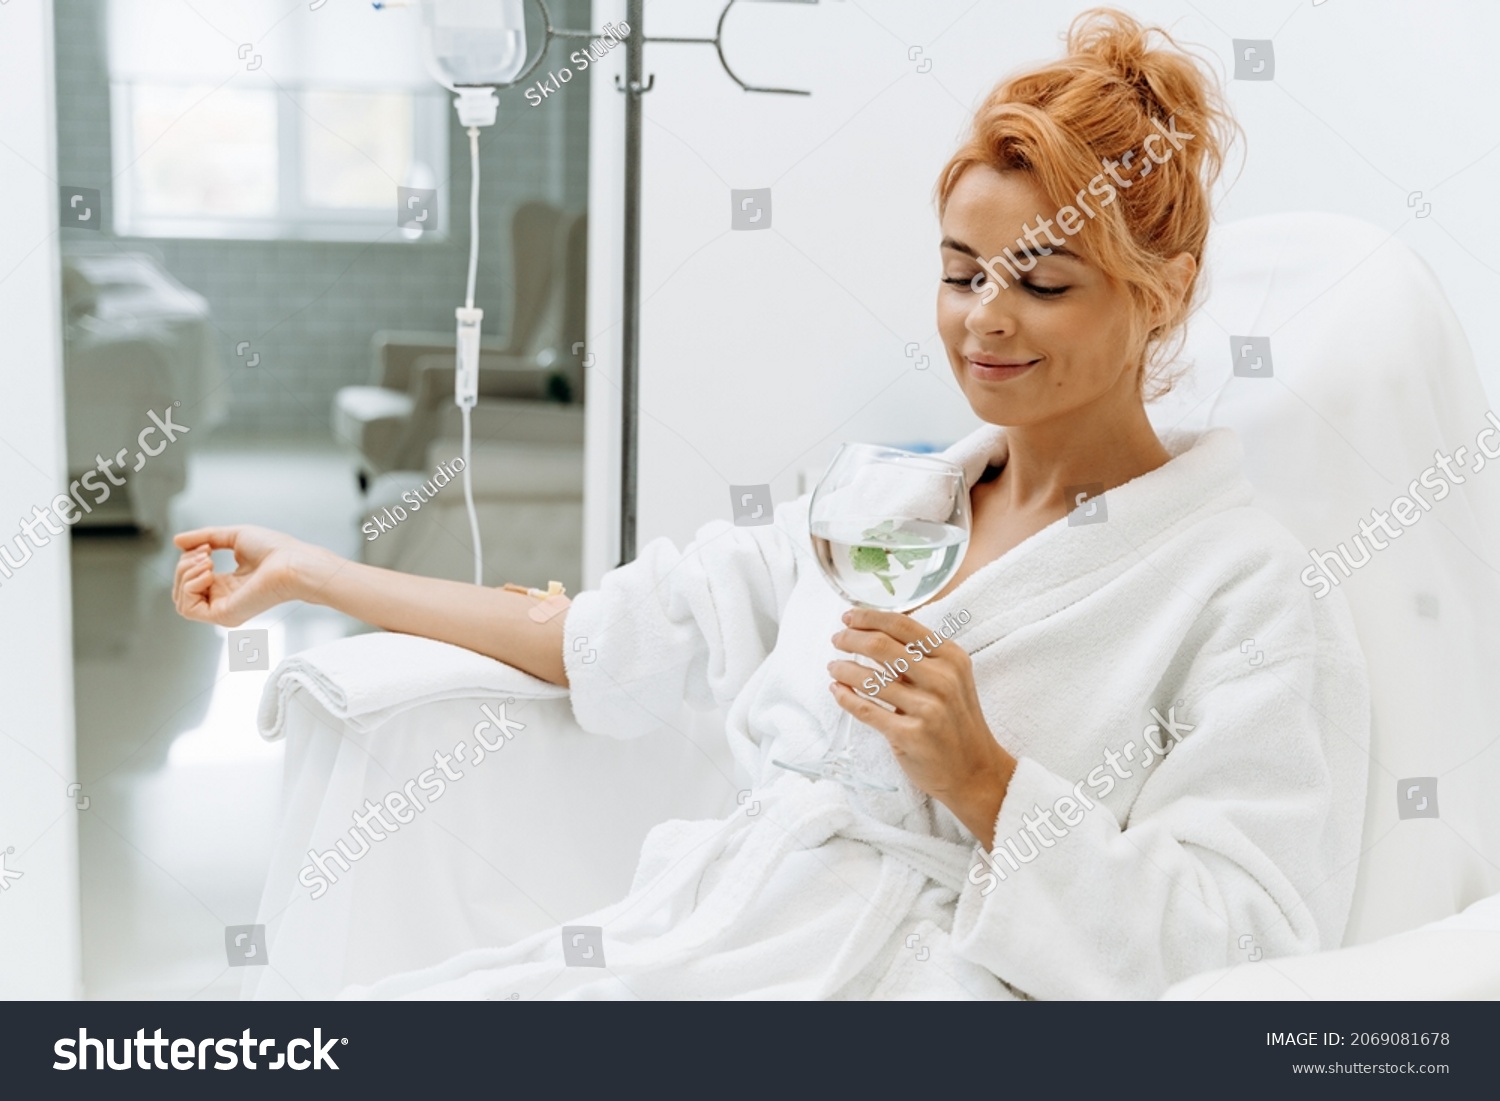 Waist up portrait view of the charming woman in white bathrobe sitting in armchair and receiving IV infusion. She is holding glass of lemon beverage and smiling  #2069081678